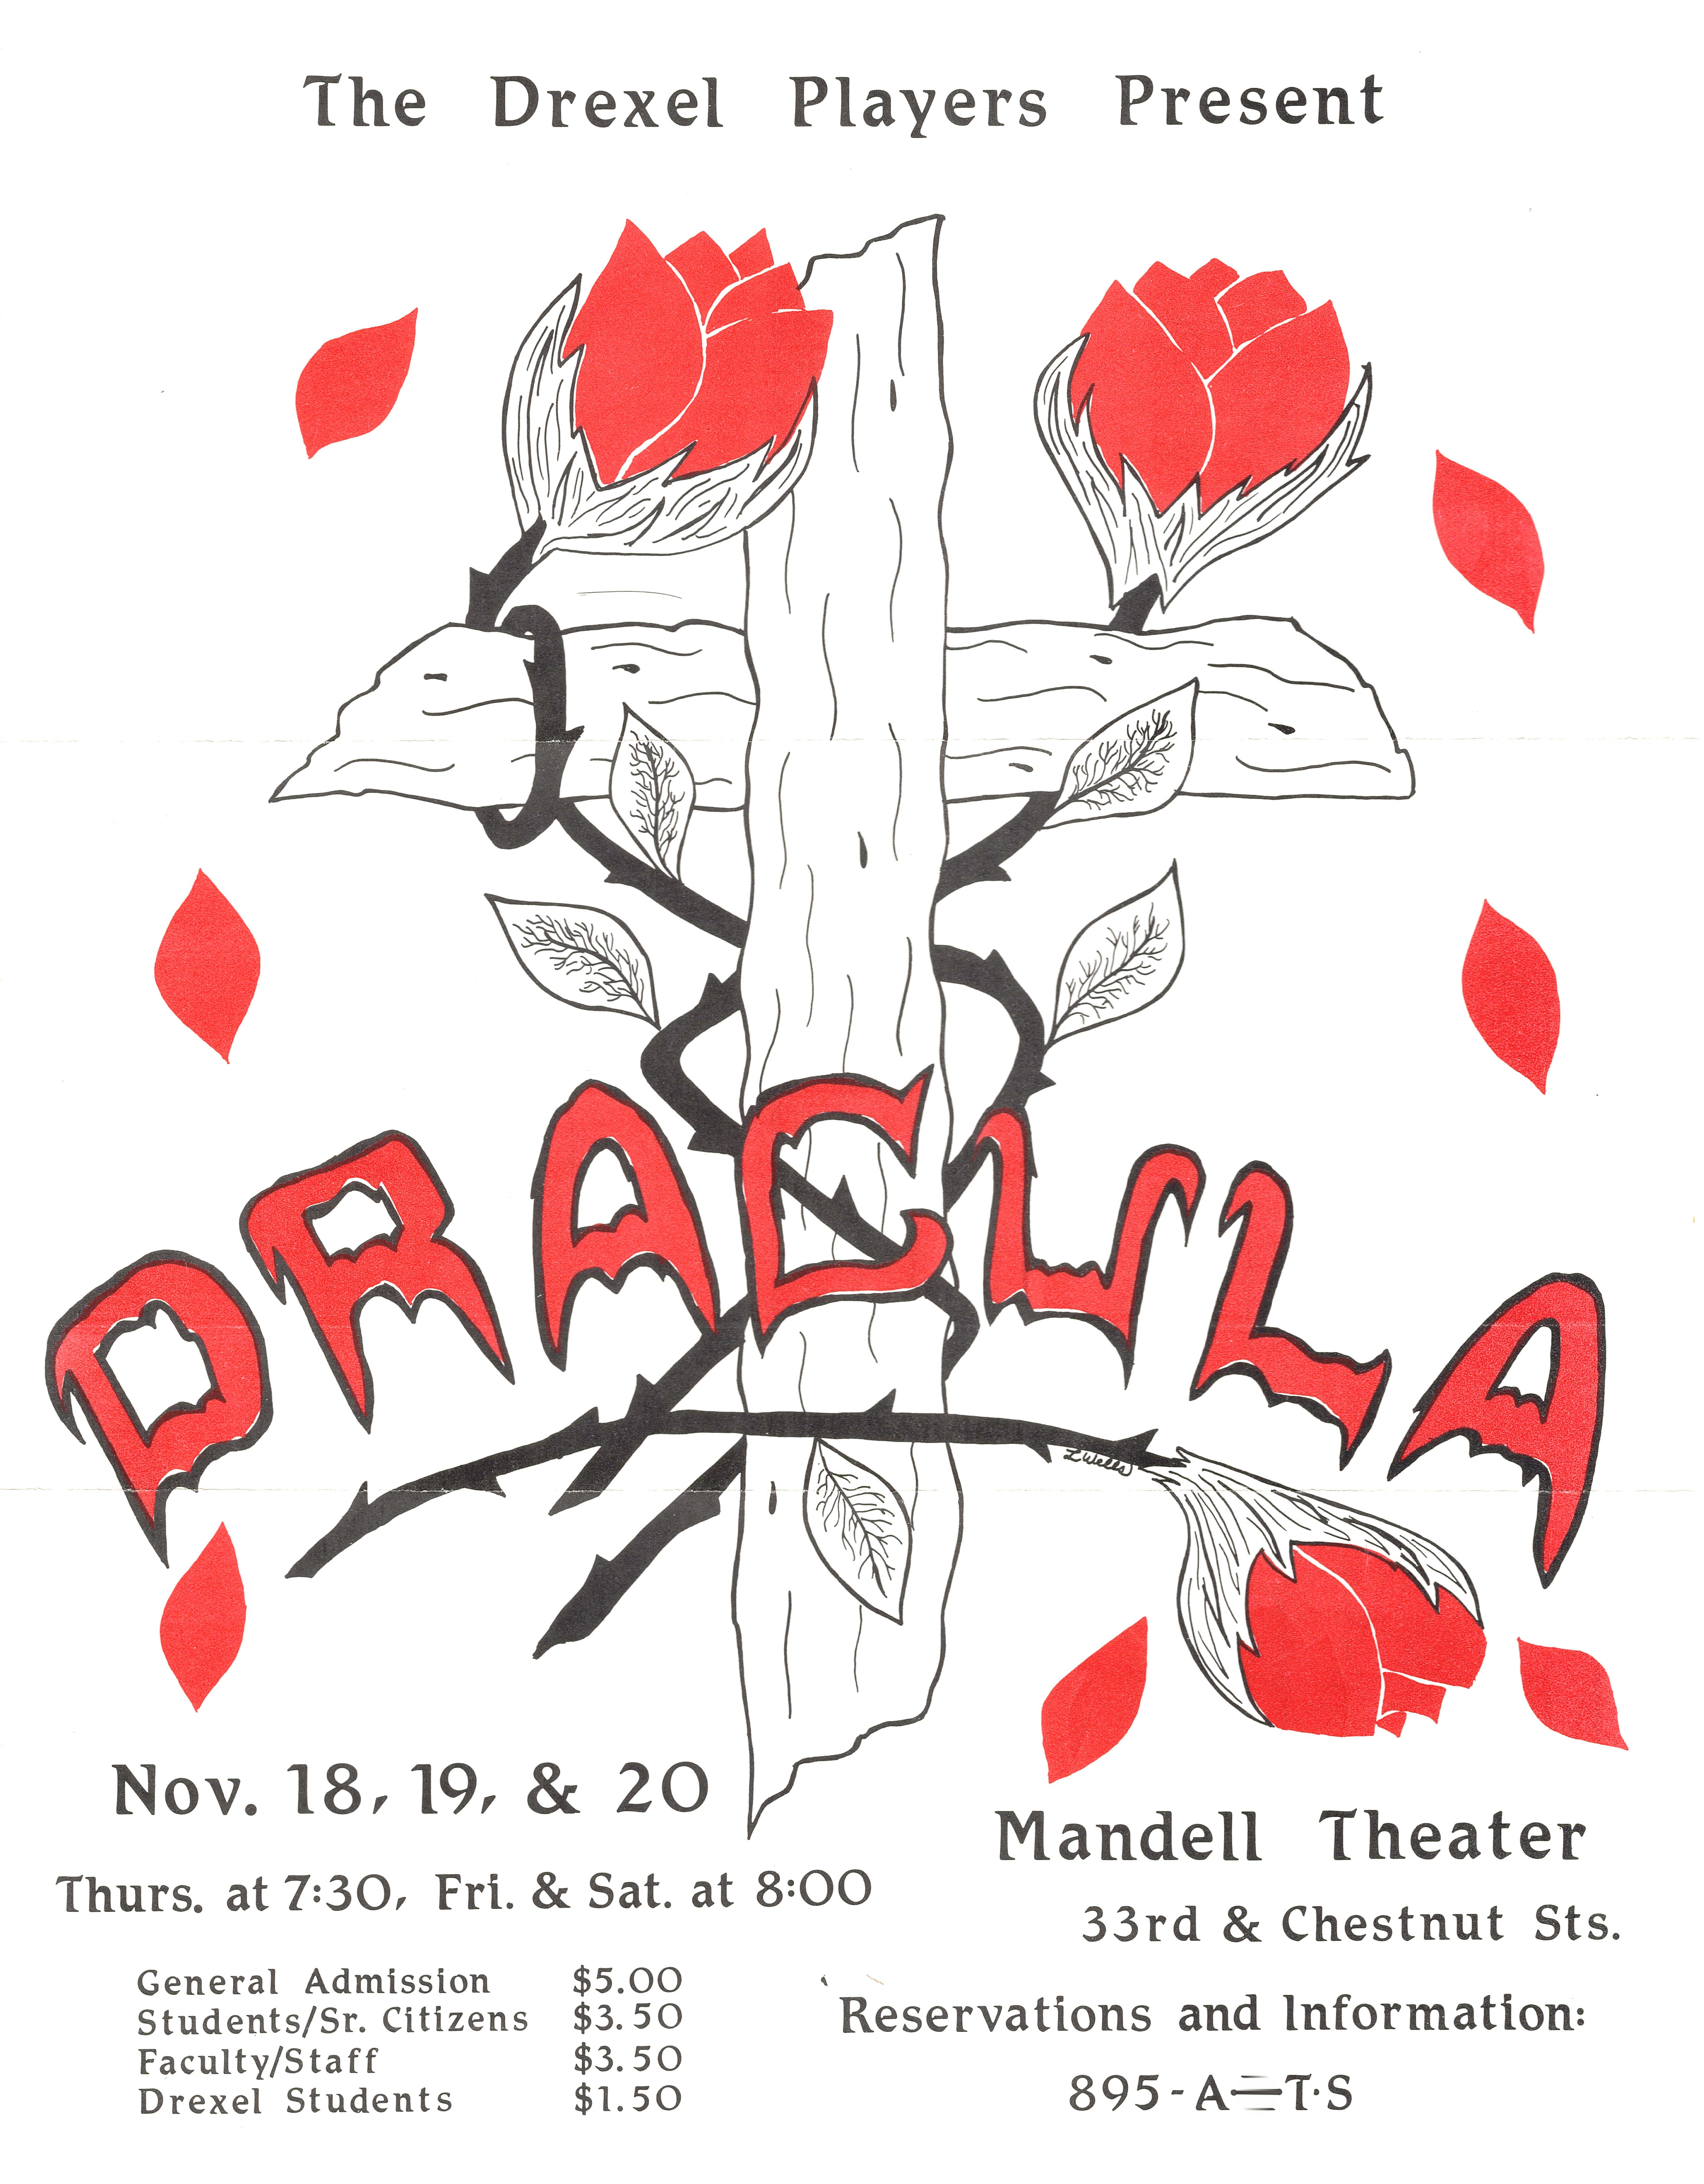 Theater poster from a 1930s production of the play 'Dracula'